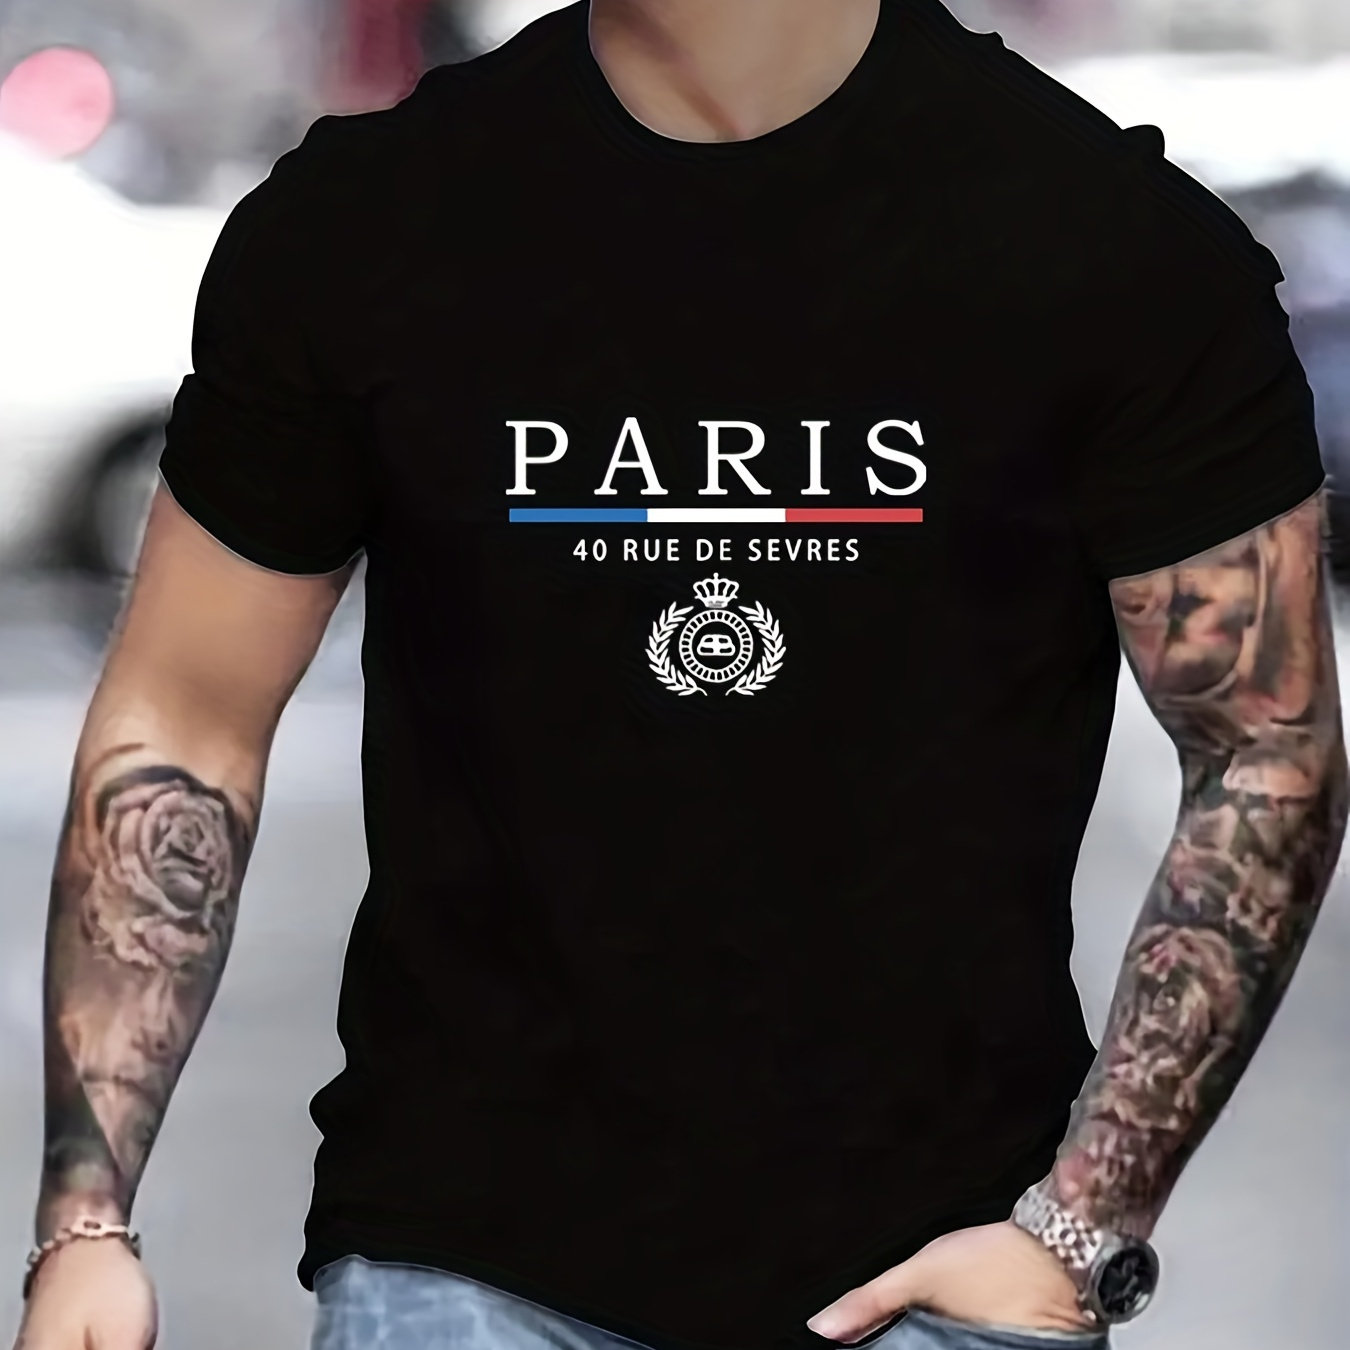 

'paris' Print T Shirt, Tees For Men, Casual Short Sleeve Tshirt For Summer Spring Fall, Tops As Gifts